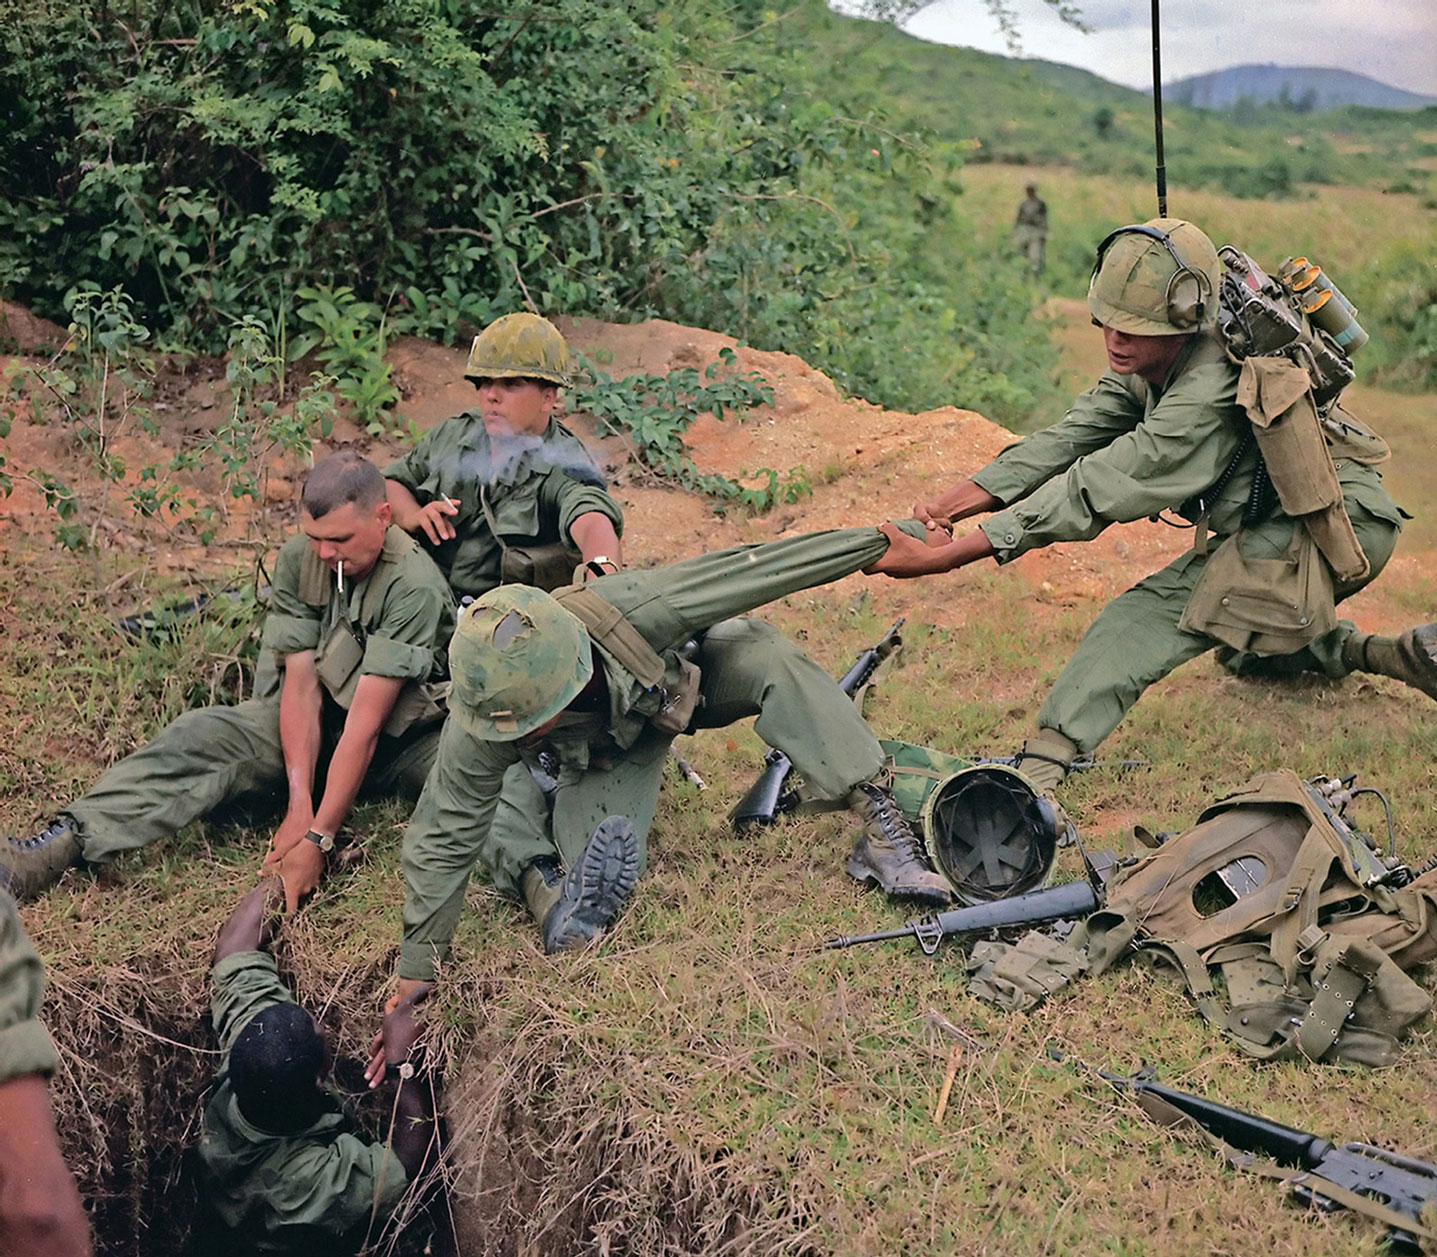 A photograph of “Tunnel rats” at work during Operation Oregon, 24th of April nineteen sixty-seven. 